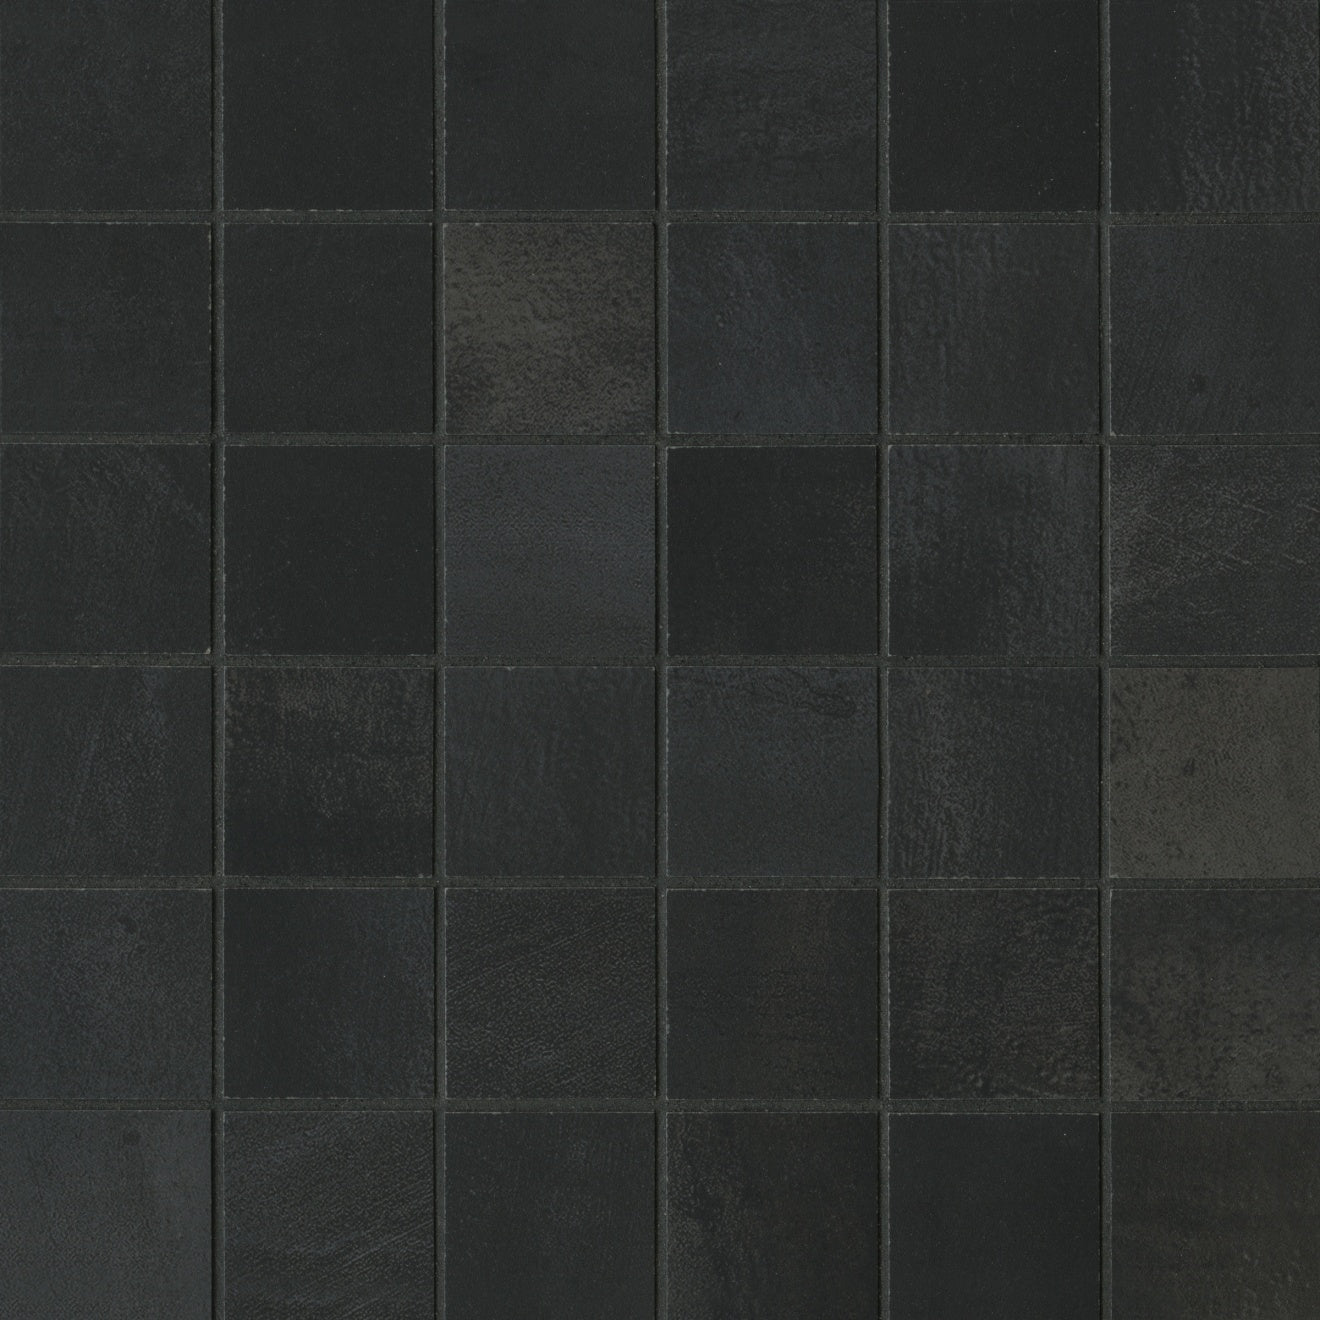 Chateau 2X2 Glazed Color Body Porcelain Mosaic 12X12 Midnight Honed